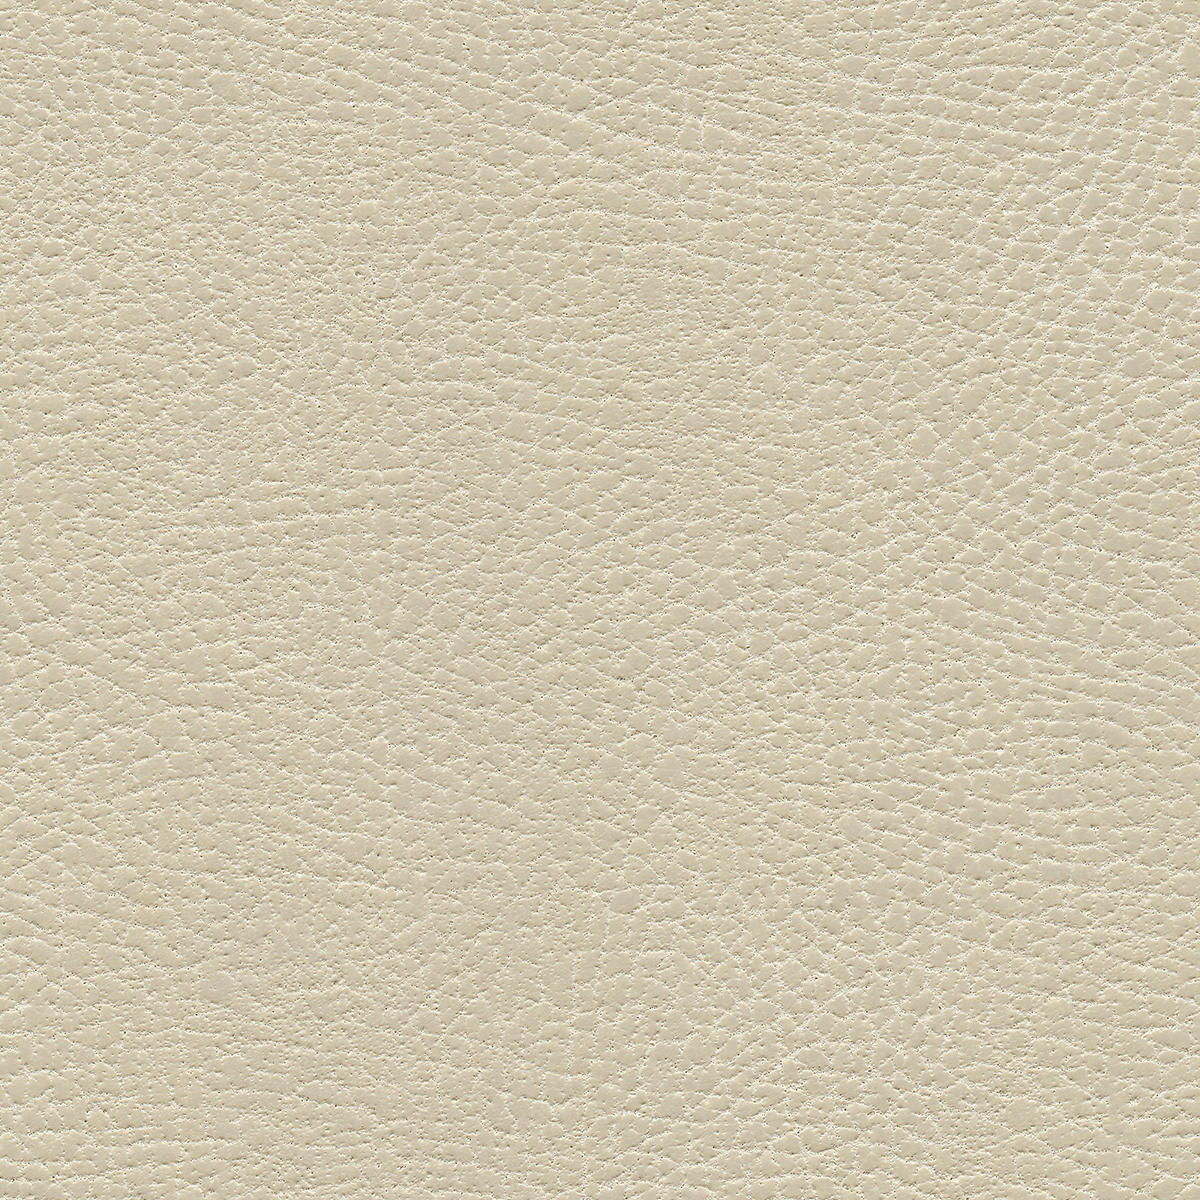 Tan Beige Distressed Plain Breathable Leather Texture Upholstery Fabric